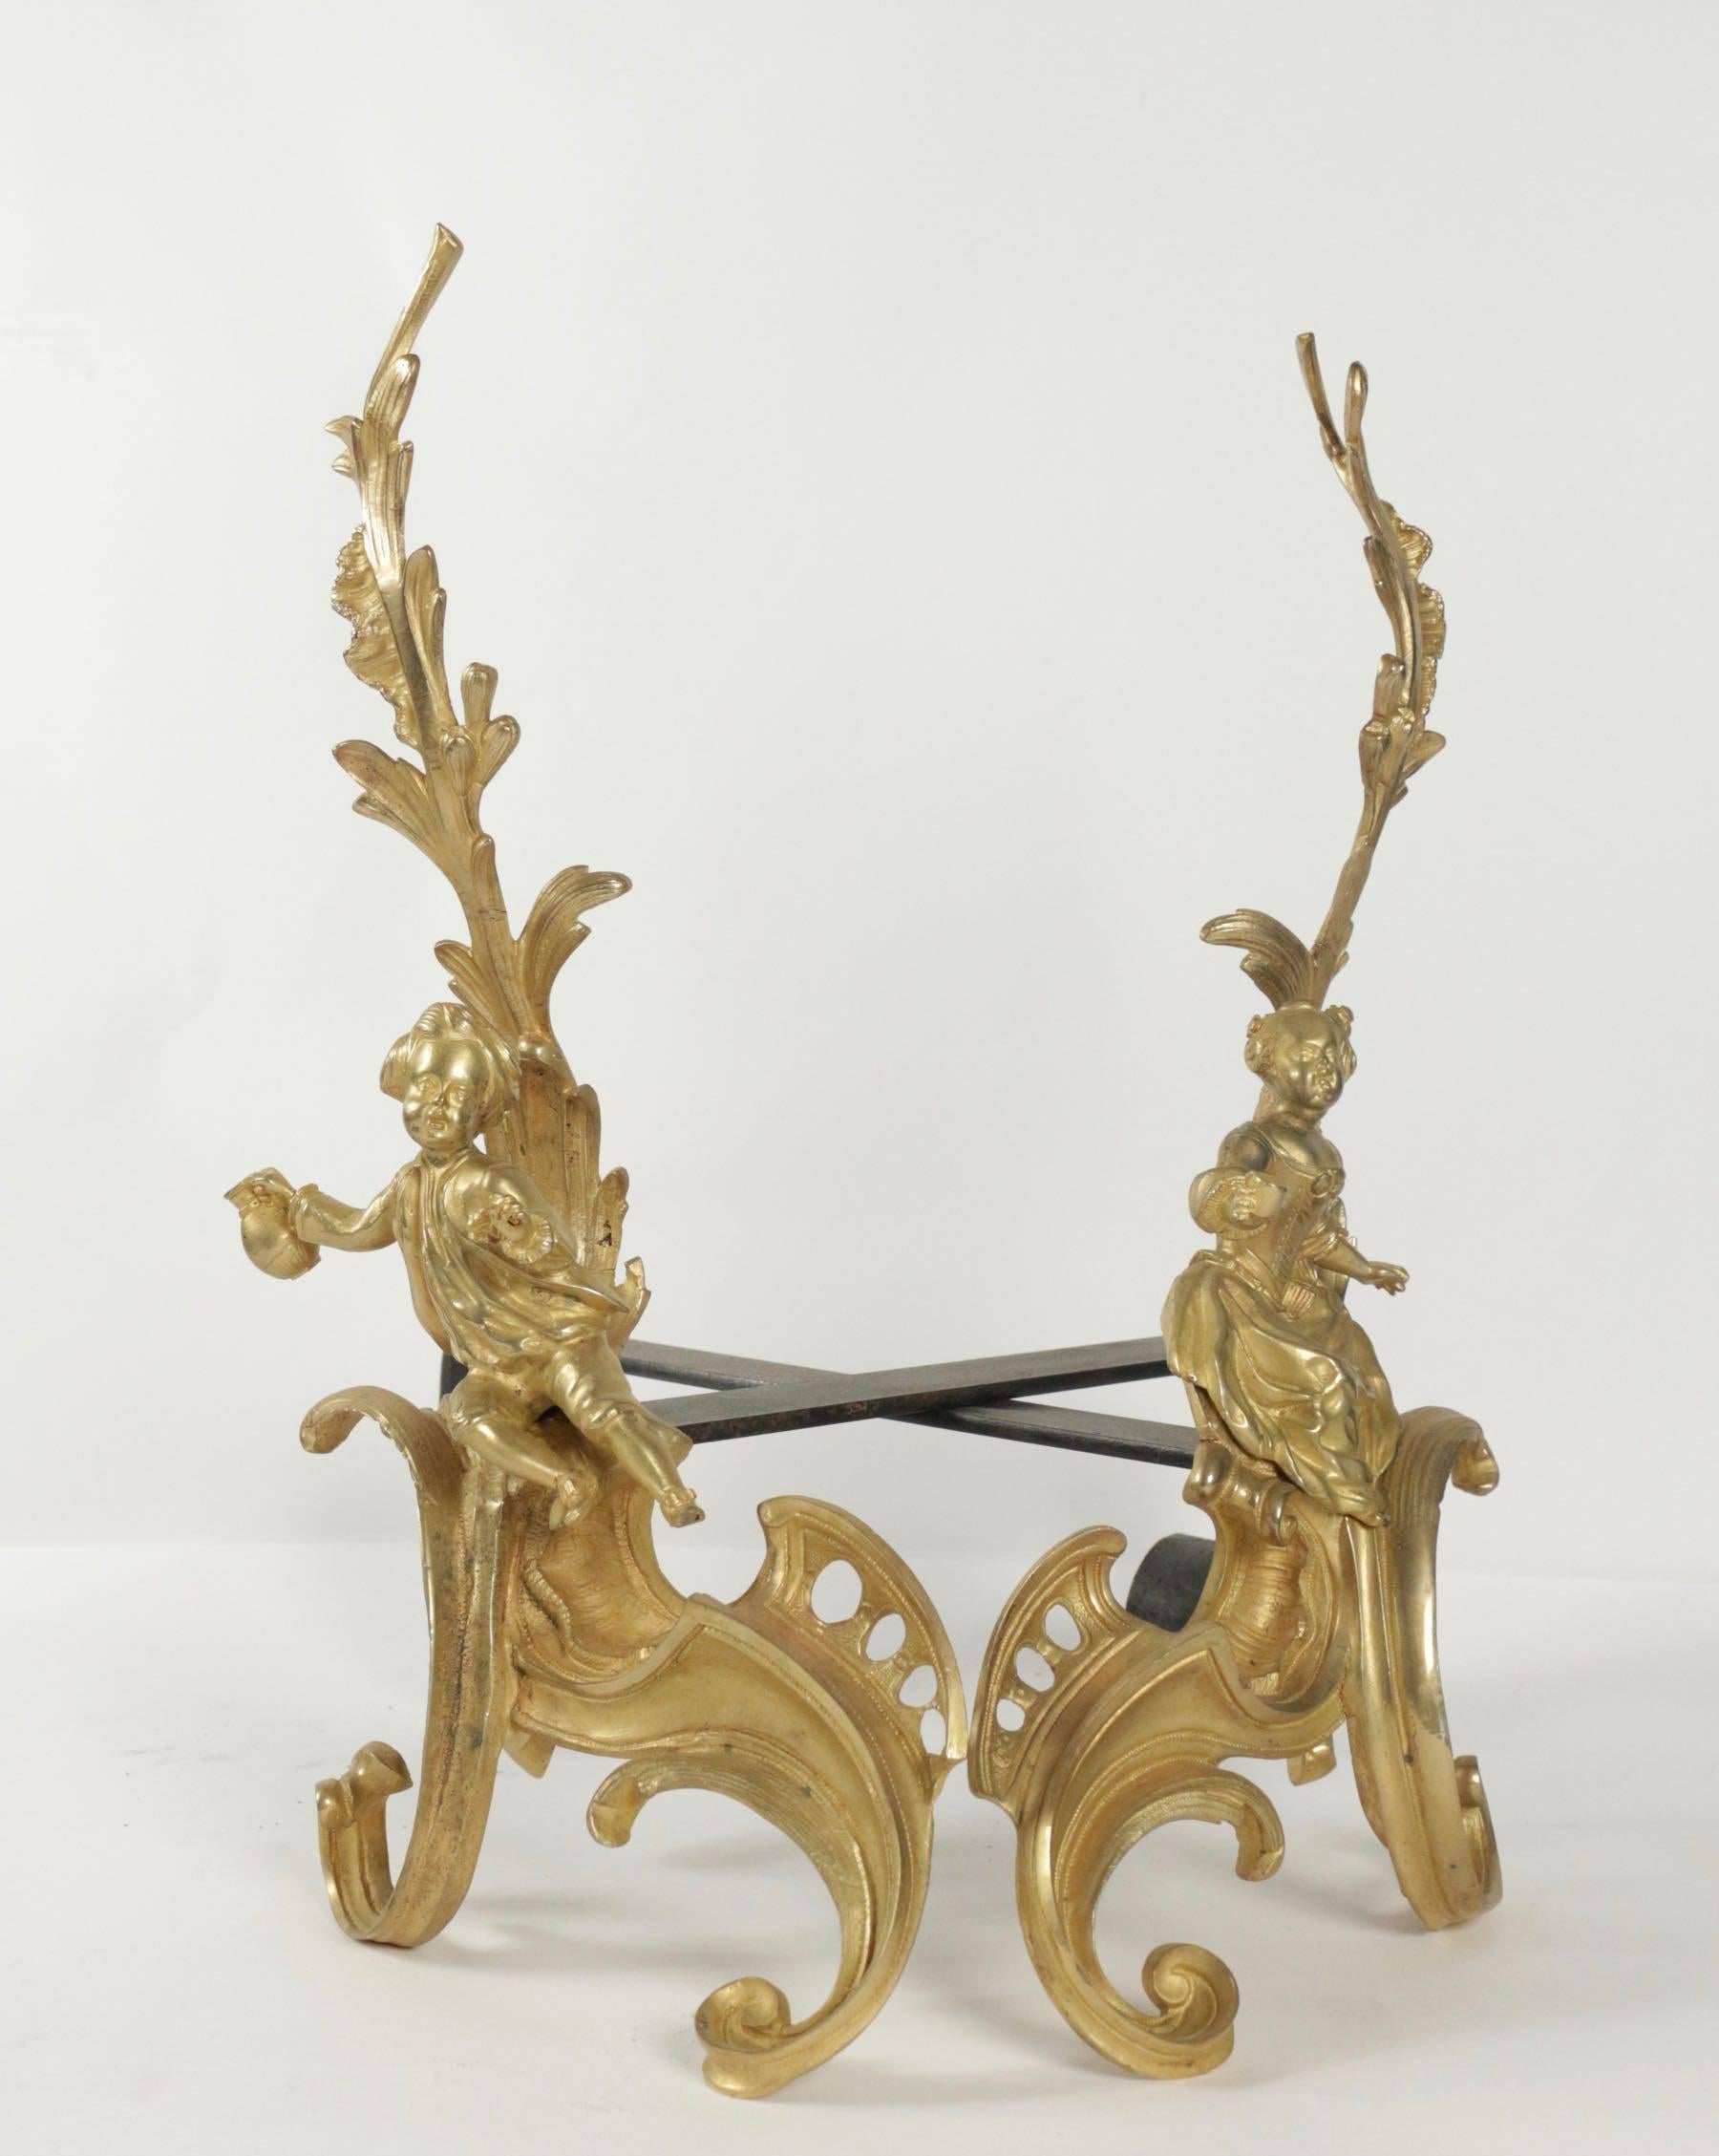 Napoleon III Pair of Louis XV Style Fireplace Irons in Gold Gilt Bronze from the 19th Century